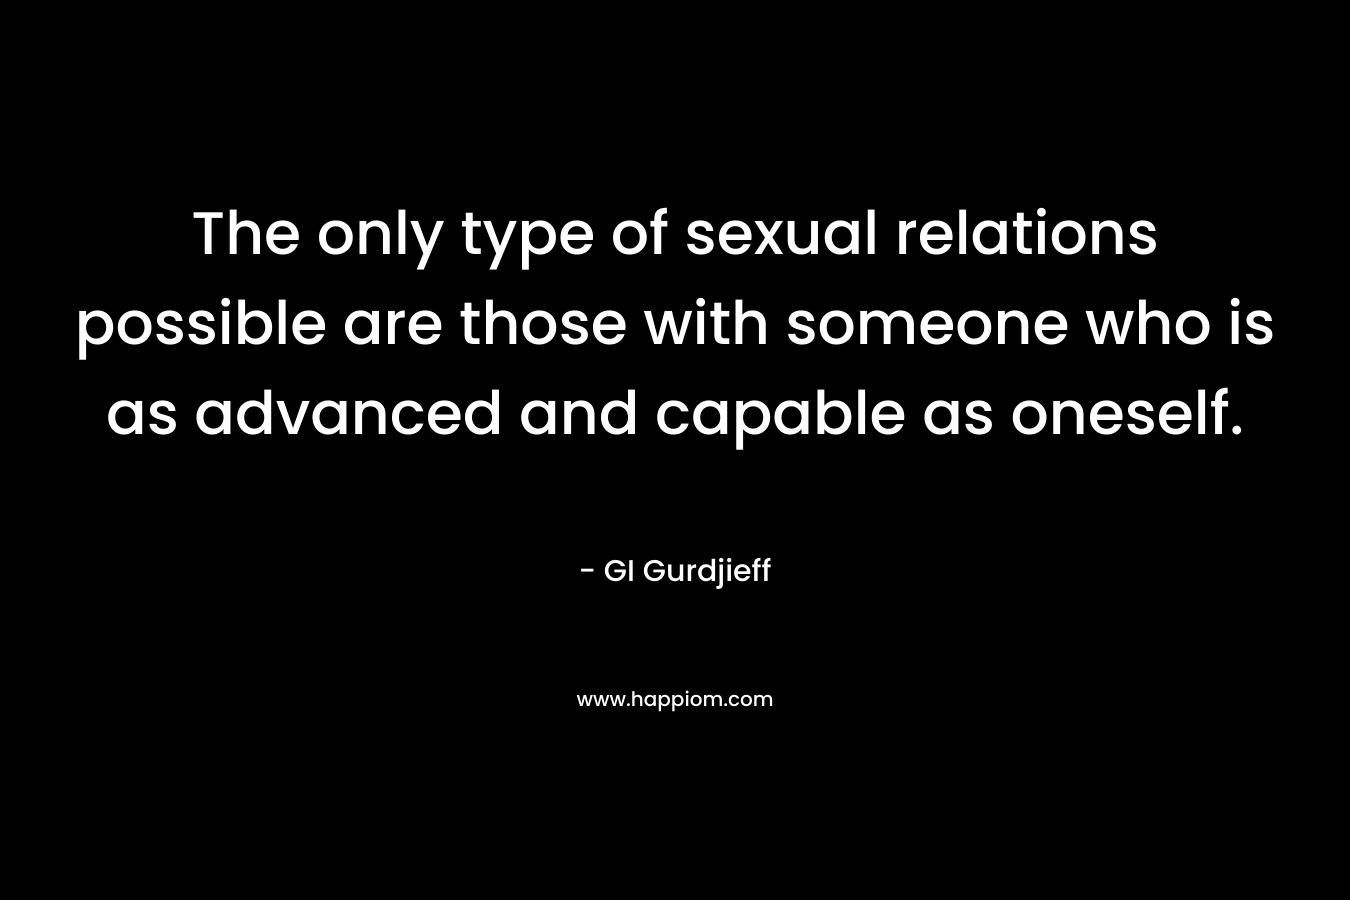 The only type of sexual relations possible are those with someone who is as advanced and capable as oneself.